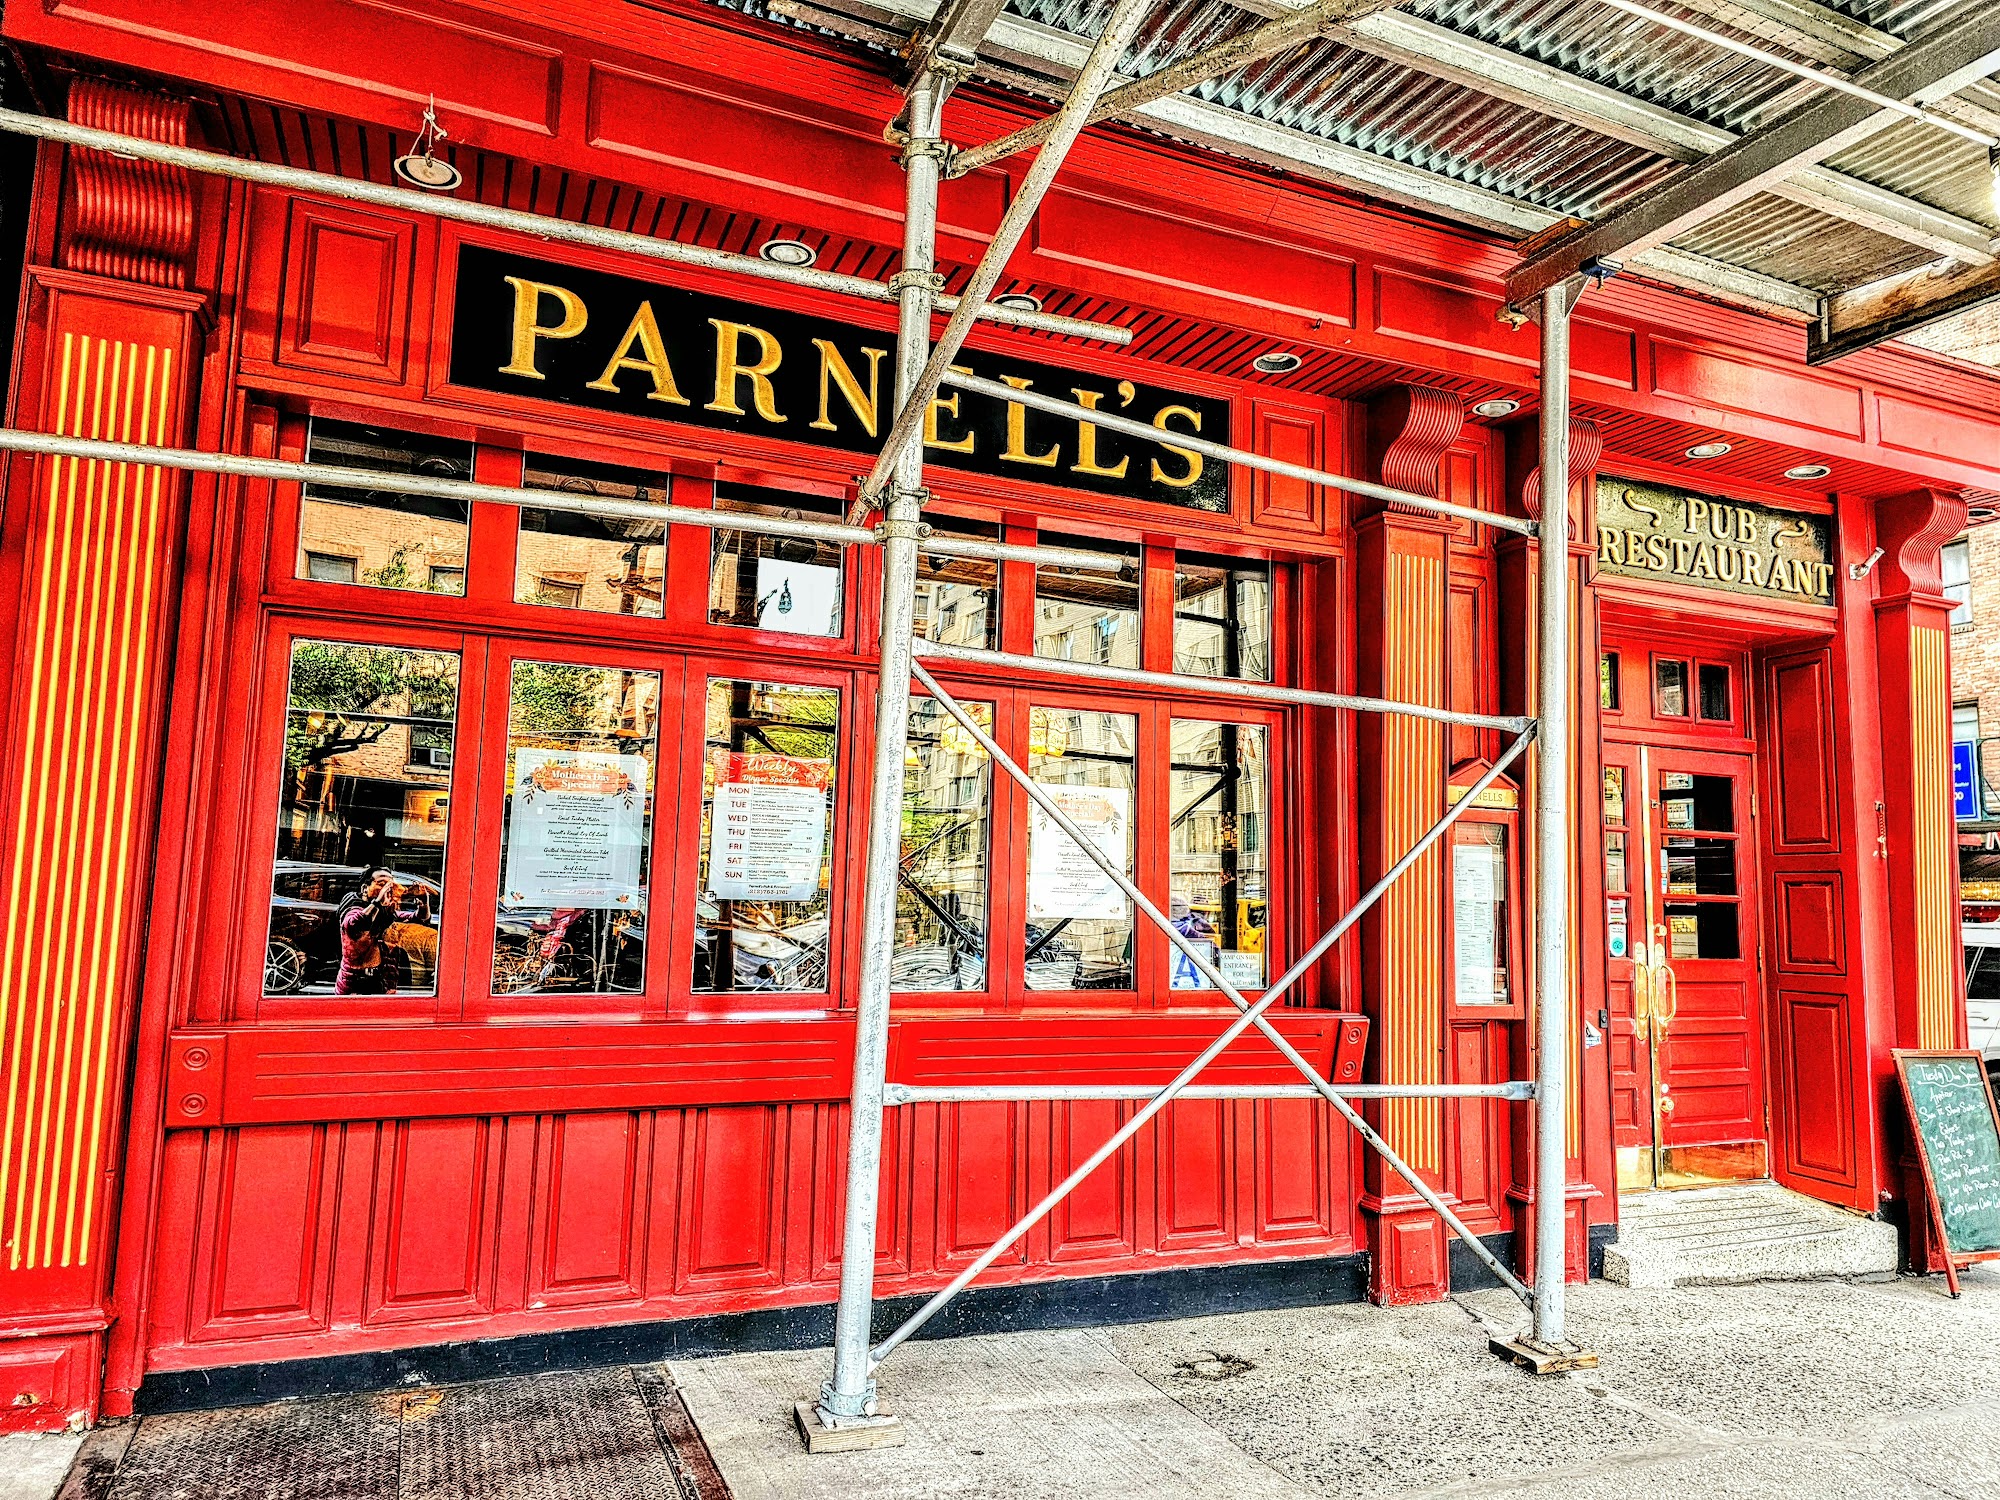 Parnell's